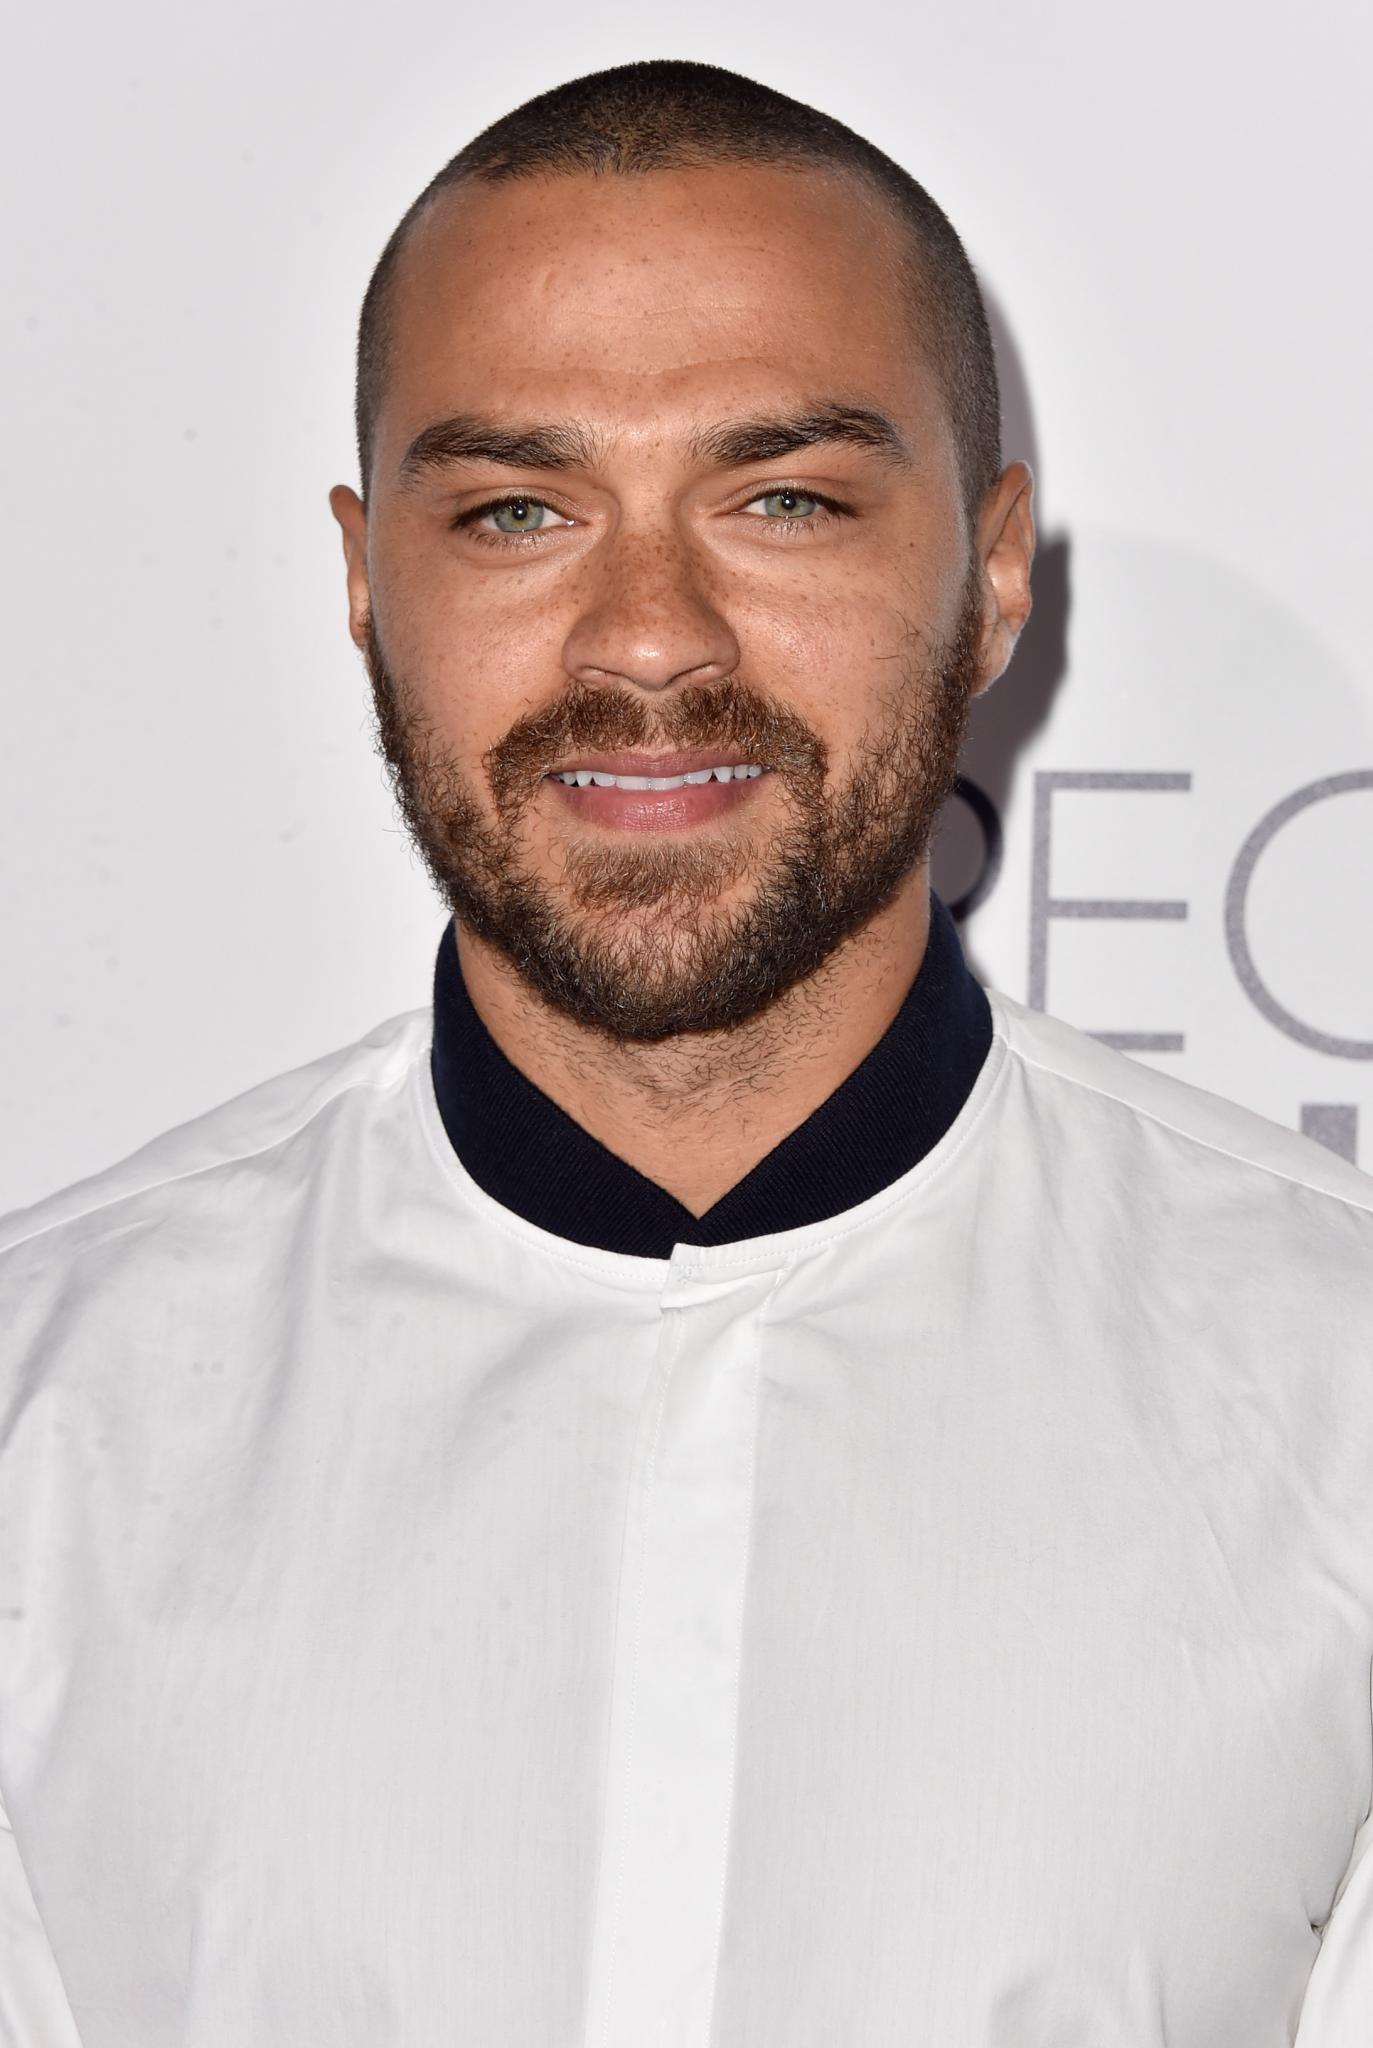 Jesse Williams Dispels 'Angry' Black Stereotype